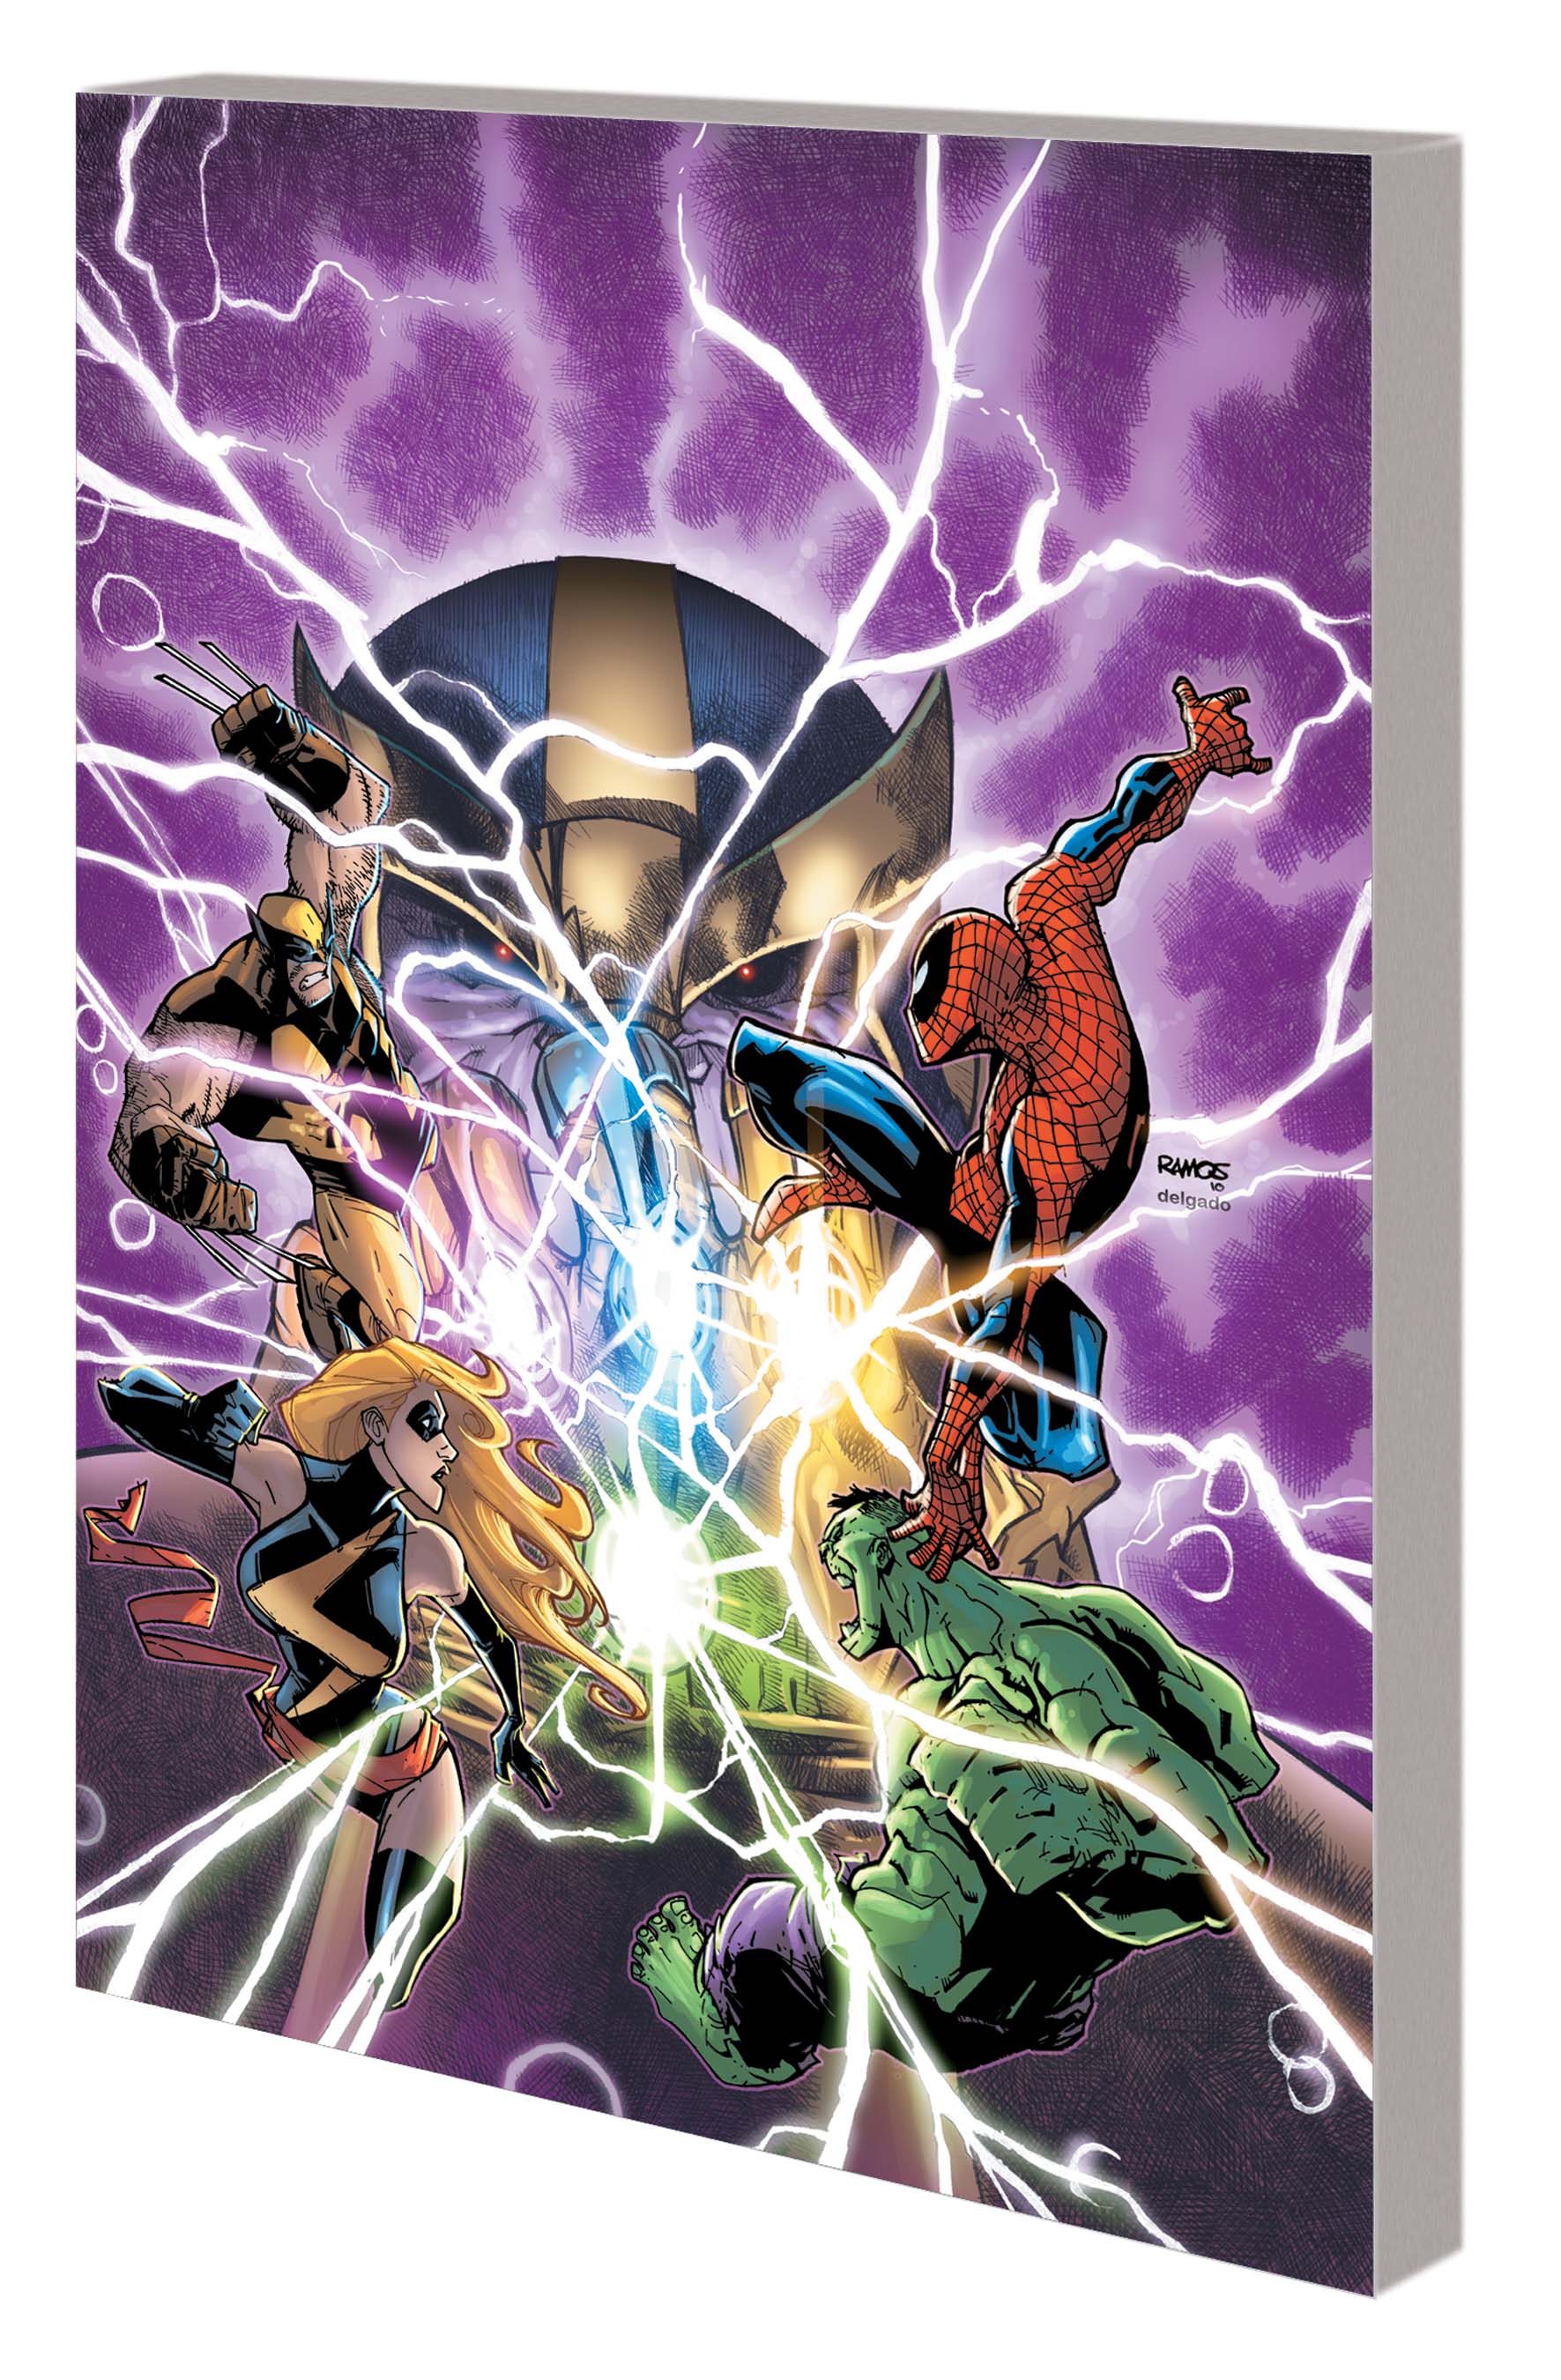 AVENGERS & THE INFINITY GAUNTLET GN-TPB (Trade Paperback)